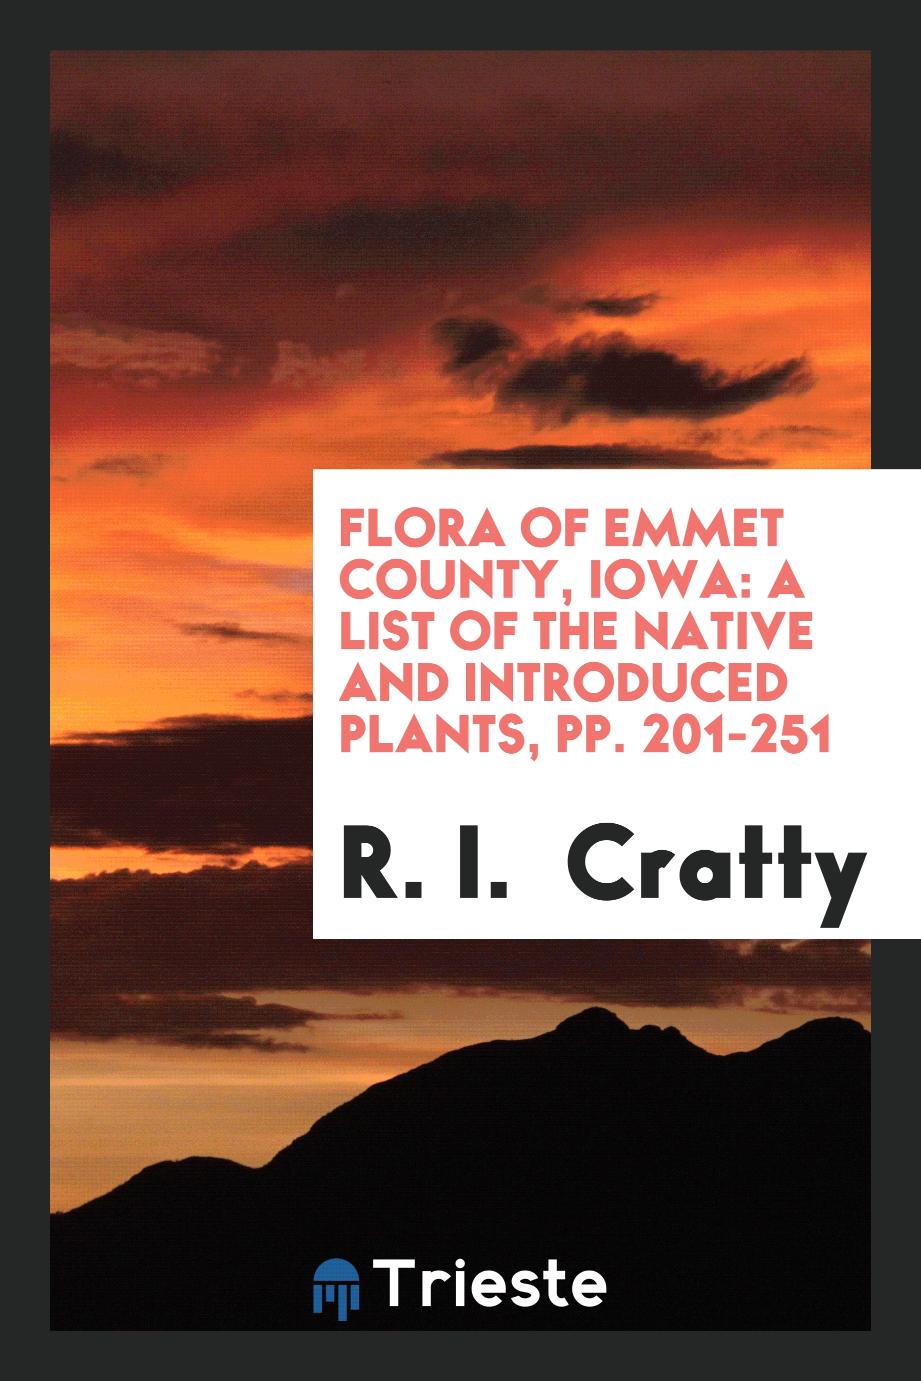 Flora of Emmet County, Iowa: a list of the native and introduced plants, pp. 201-251